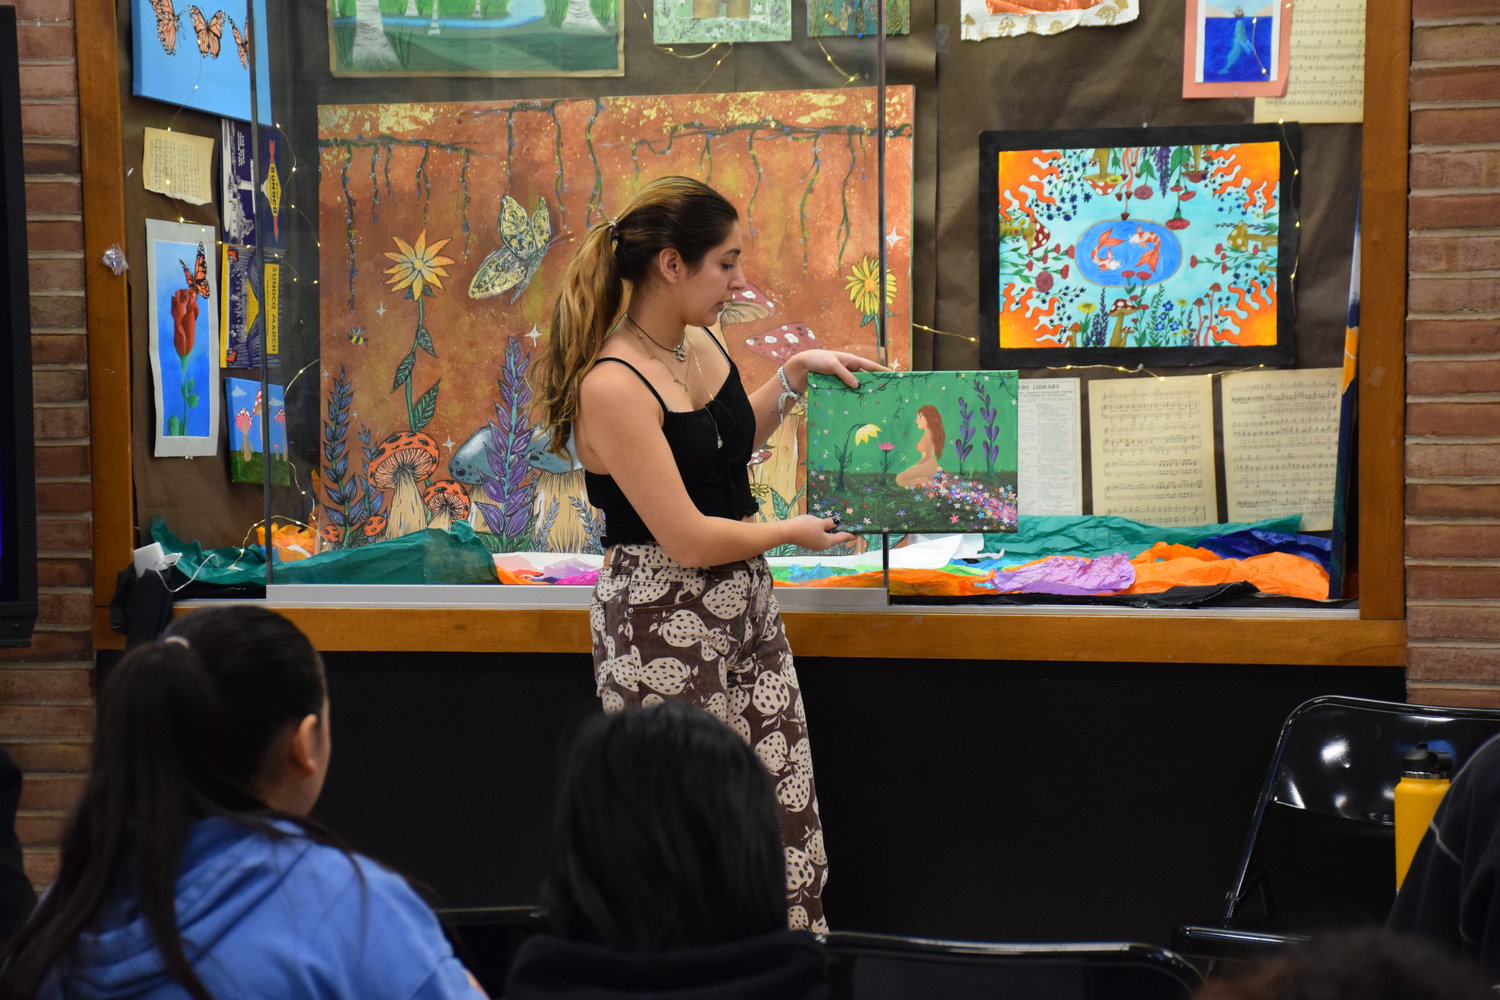 Gianna Spinelli, a senior, explained the process of how she conceptualized and made her paintings.